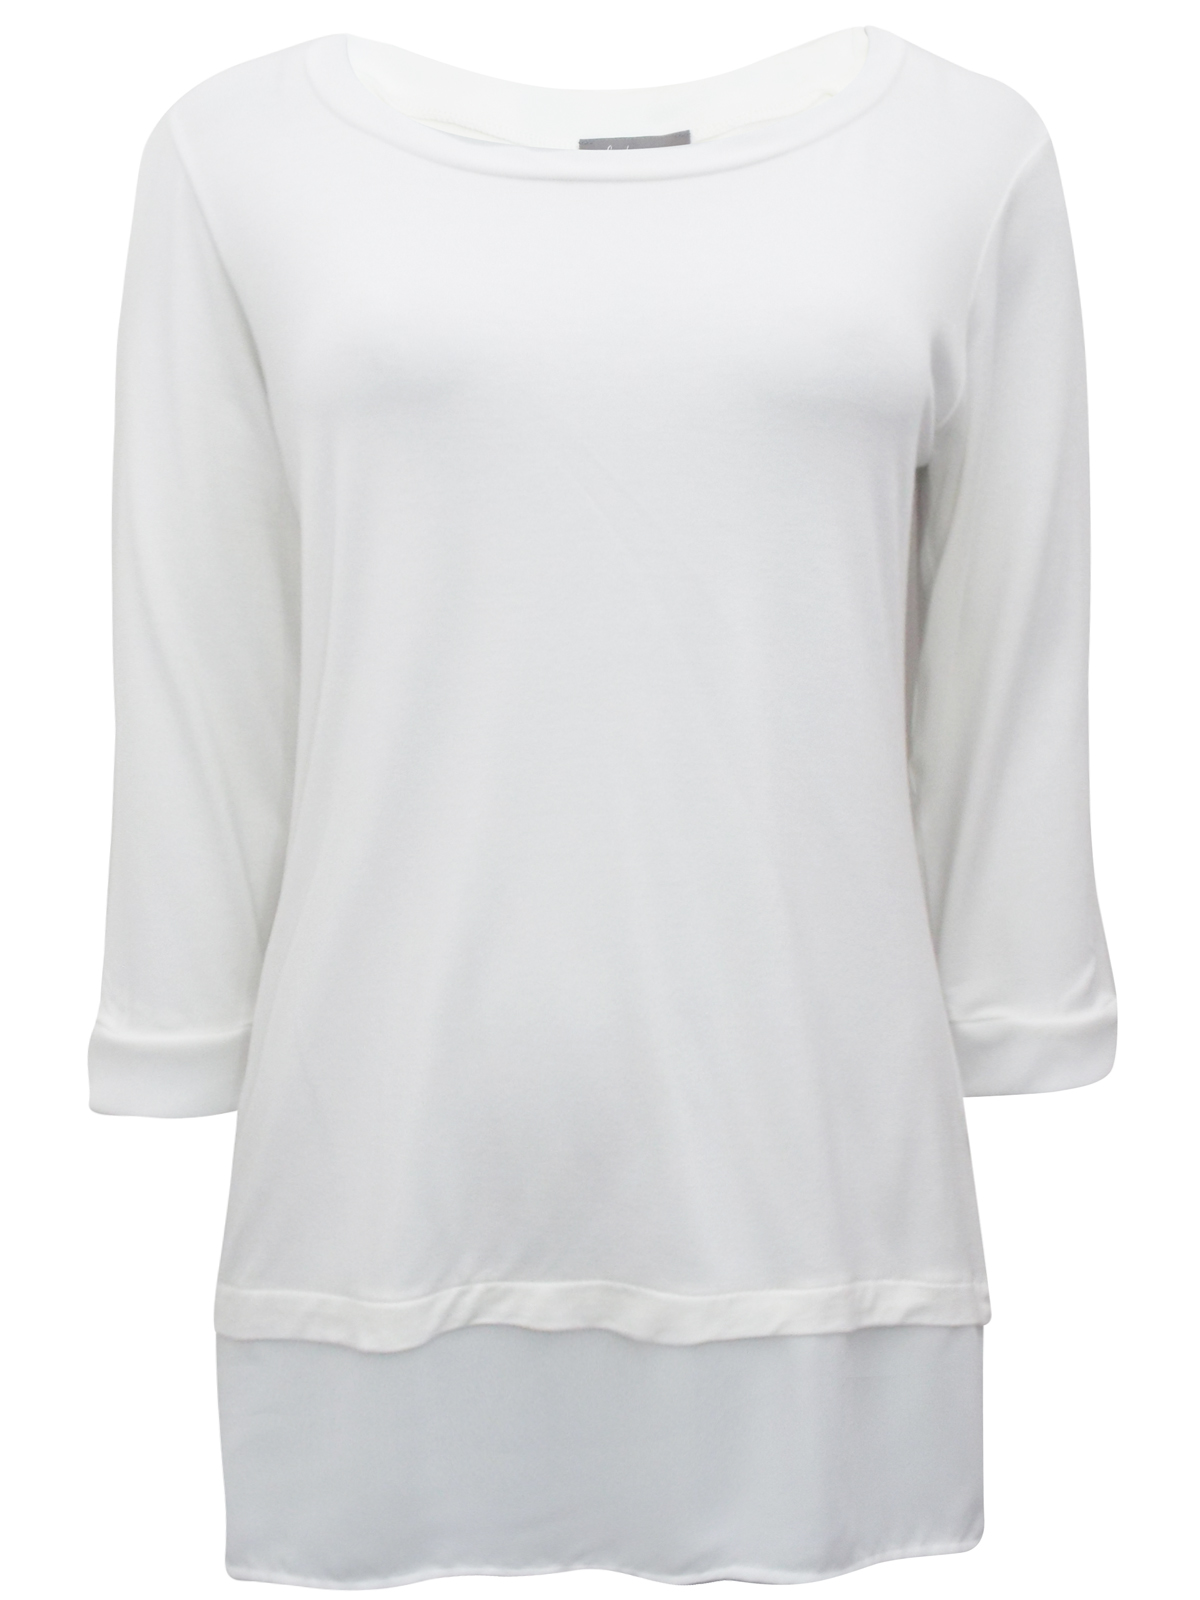 First Avenue CREAM 3/4 Sleeve Chiffon Panel Top - Size 12 to 20